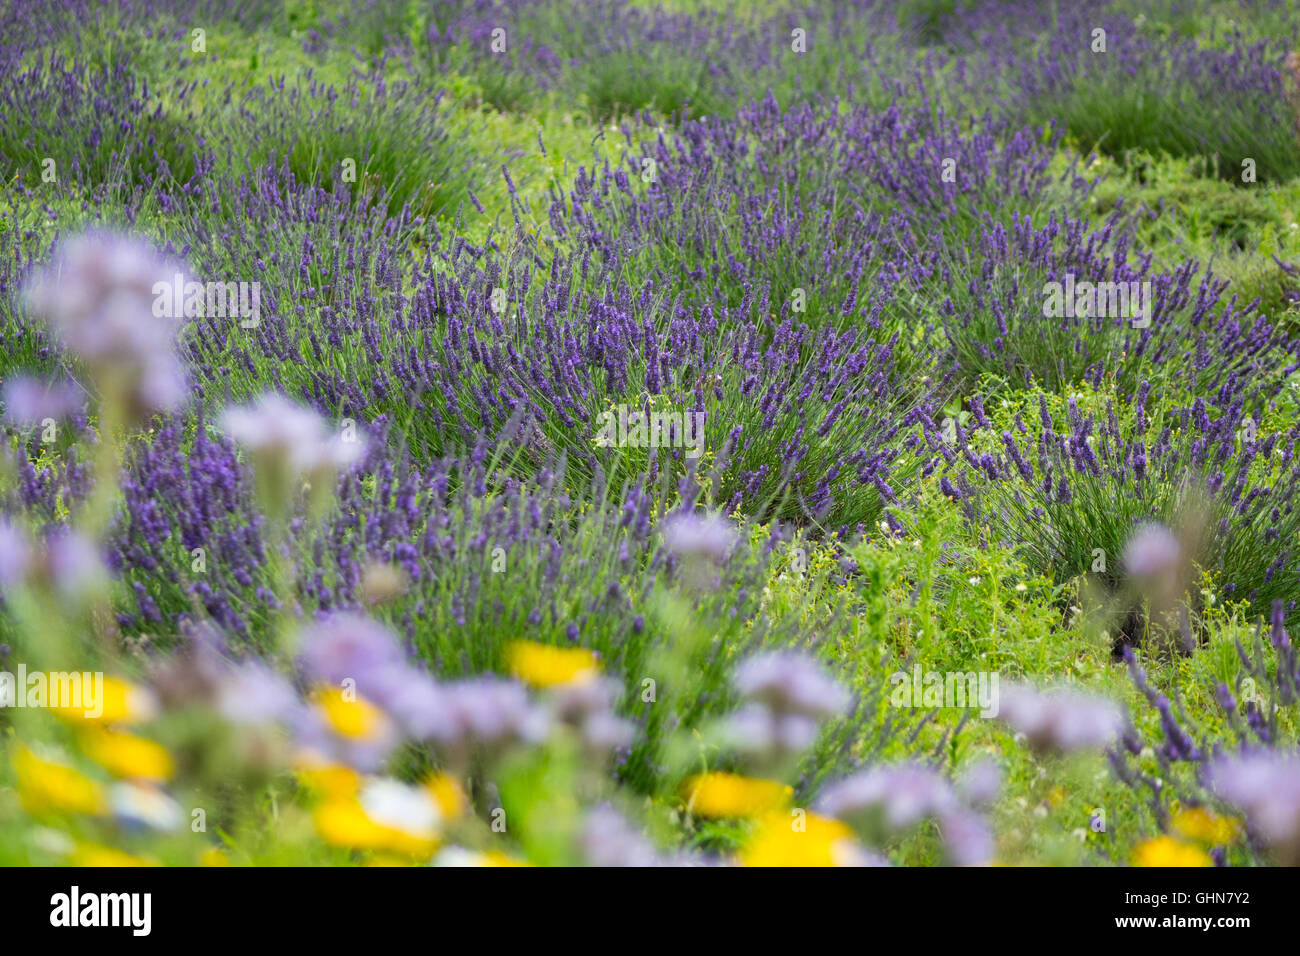 Lavender field with wildflowers in the foreground Stock Photo